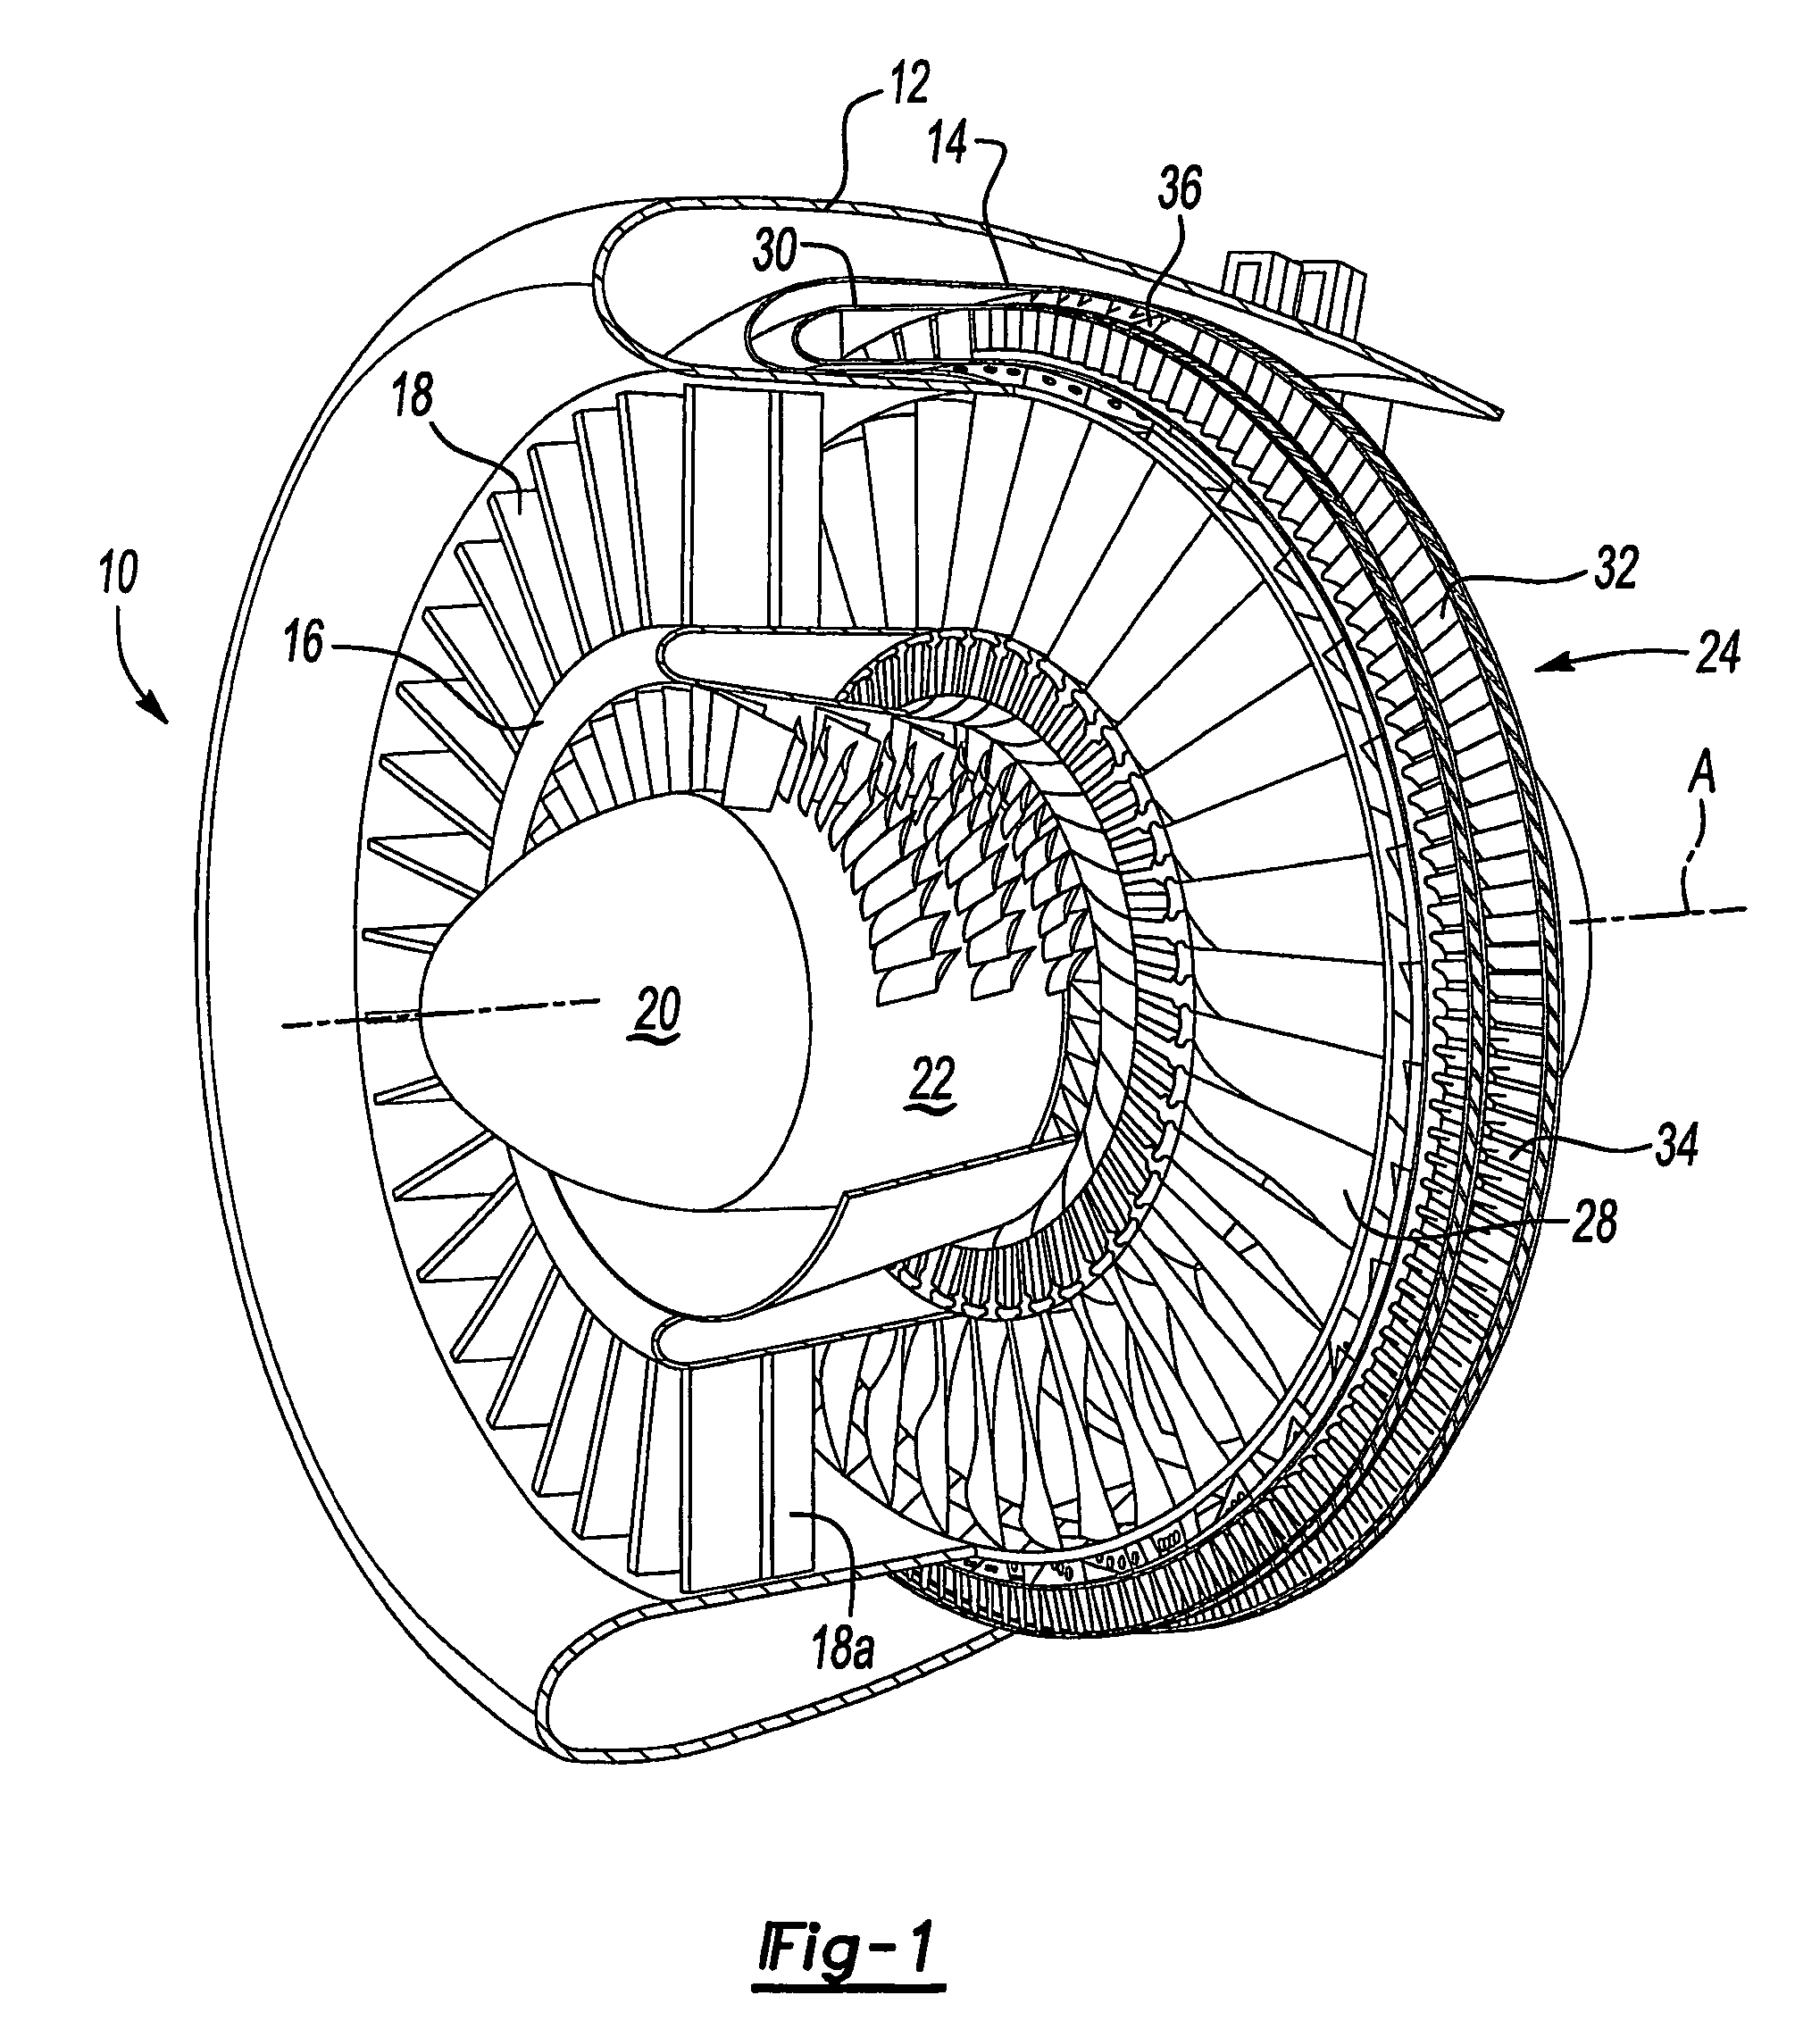 Stacked annular components for turbine engines